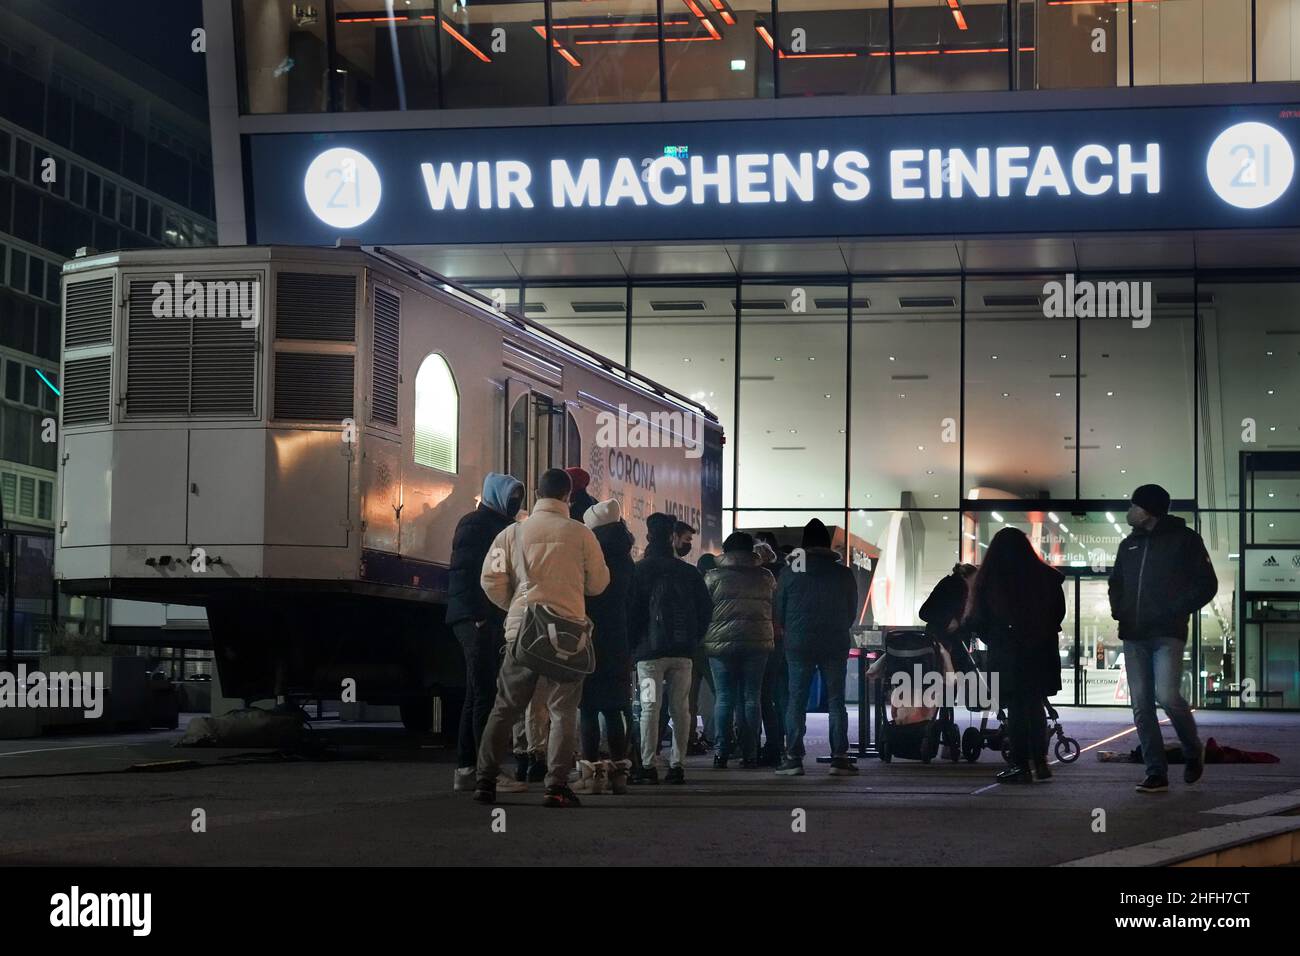 Dortmund, Germany, January 16th, 2022 - People are waiting in front of a test station in a trailer at the Dortmund Football Museum to be tested with a rapid corona antigen test. The neon sign above them says: WE JUST DO IT"  ---   Dortmund, 16.1.2022 - Leute warten vor einer Teststation in einem Trailer am Dortmunder Fußballmuseum, um mit einem Corona-Antigen-Schnelltest getestet zu werden. Stock Photo